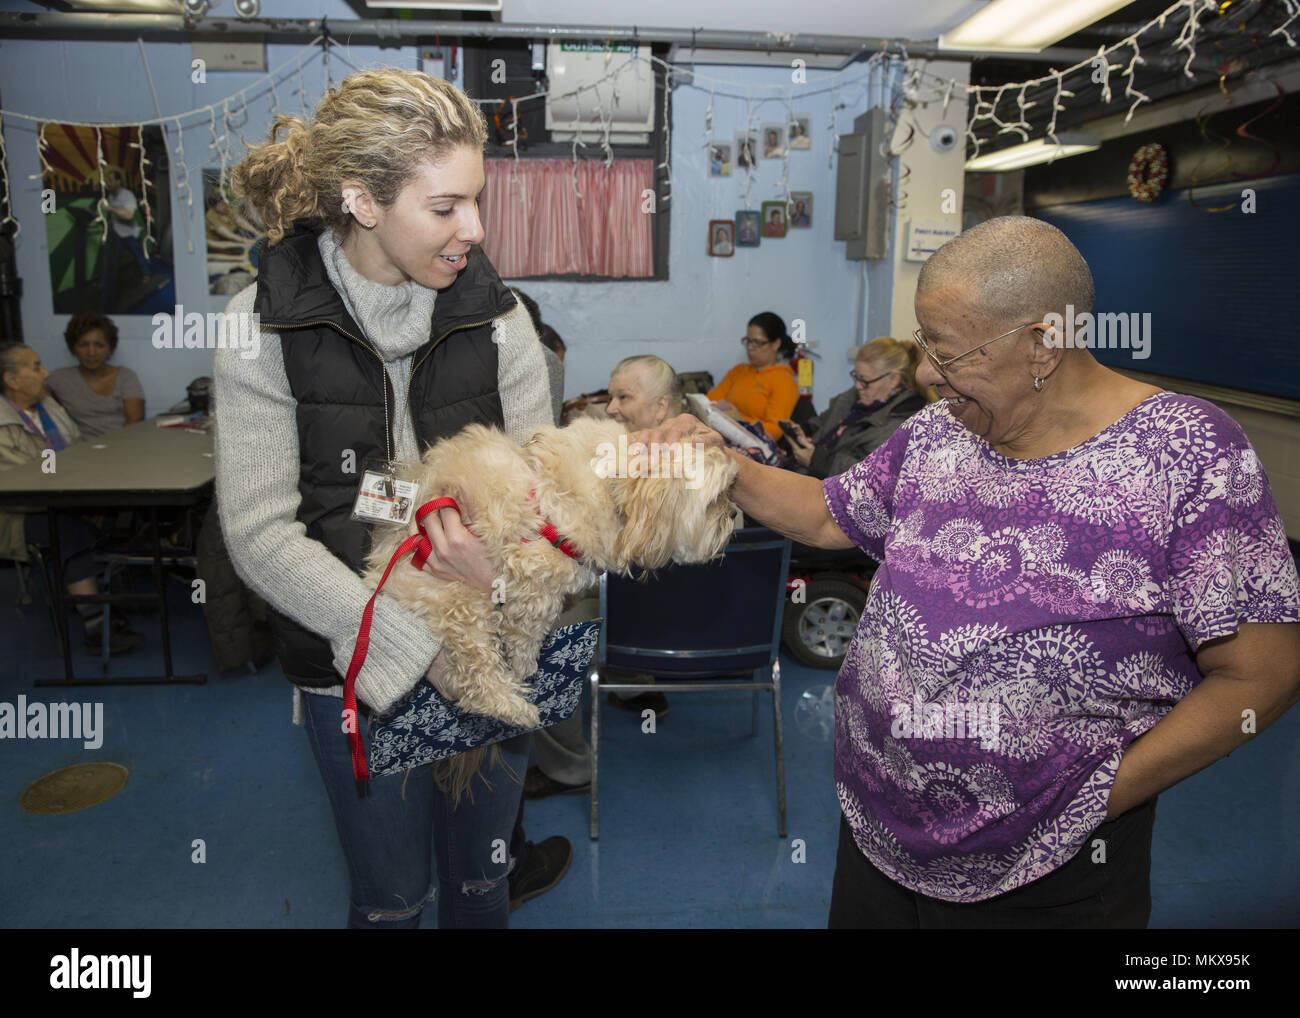 Dog therapist with therapy dog visits regularly a senior center on the Lower East Side of Manhattan, New York City. Stock Photo